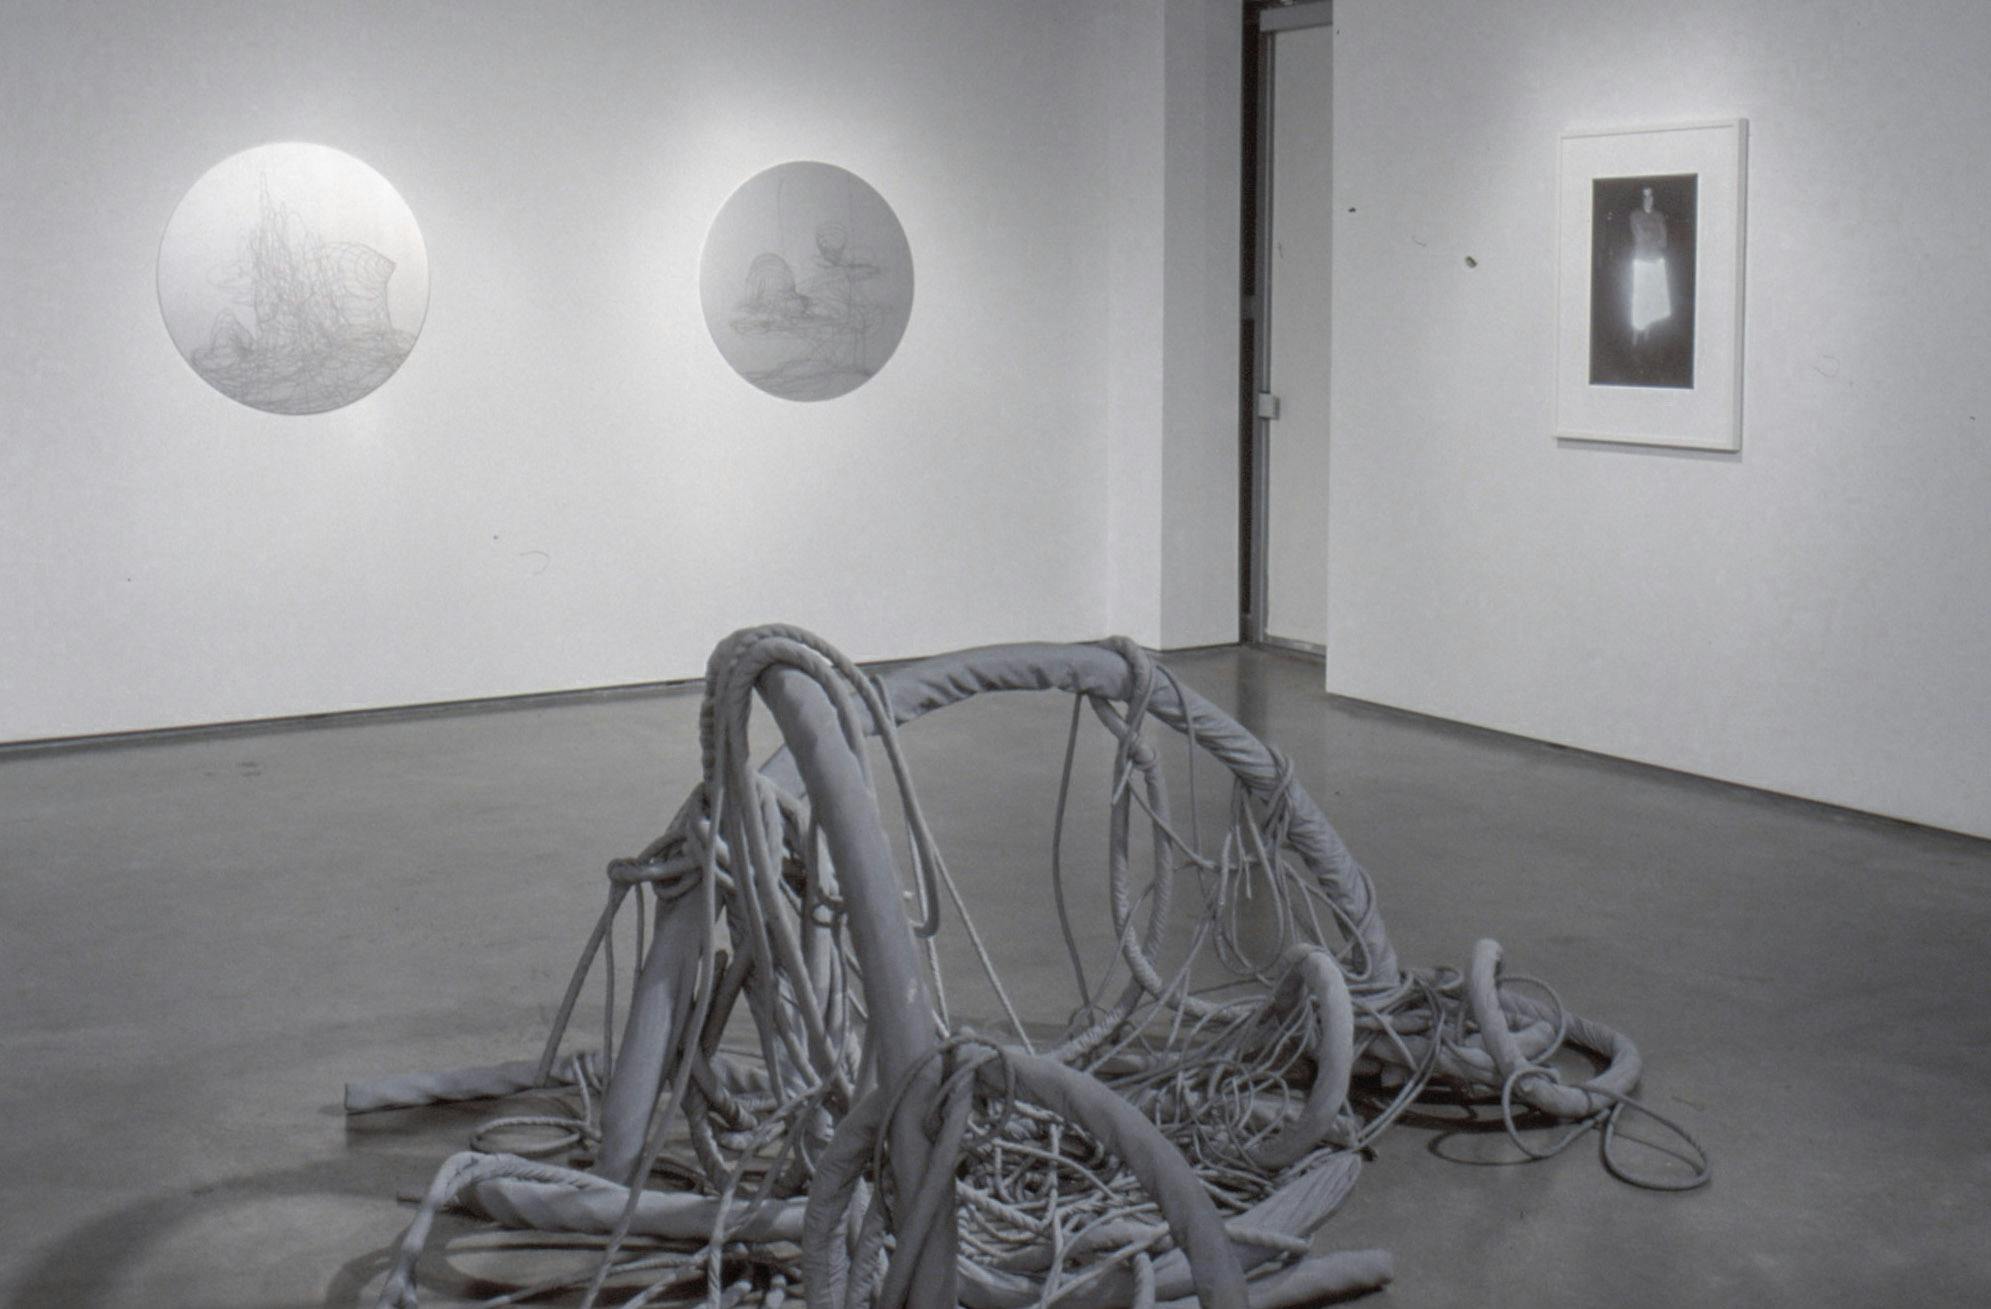 Four artworks are installed in a gallery space. A large grey sculpture sits on the floor. A  framed black and white photograph and two circular shaped sculptures are mounted on the walls.